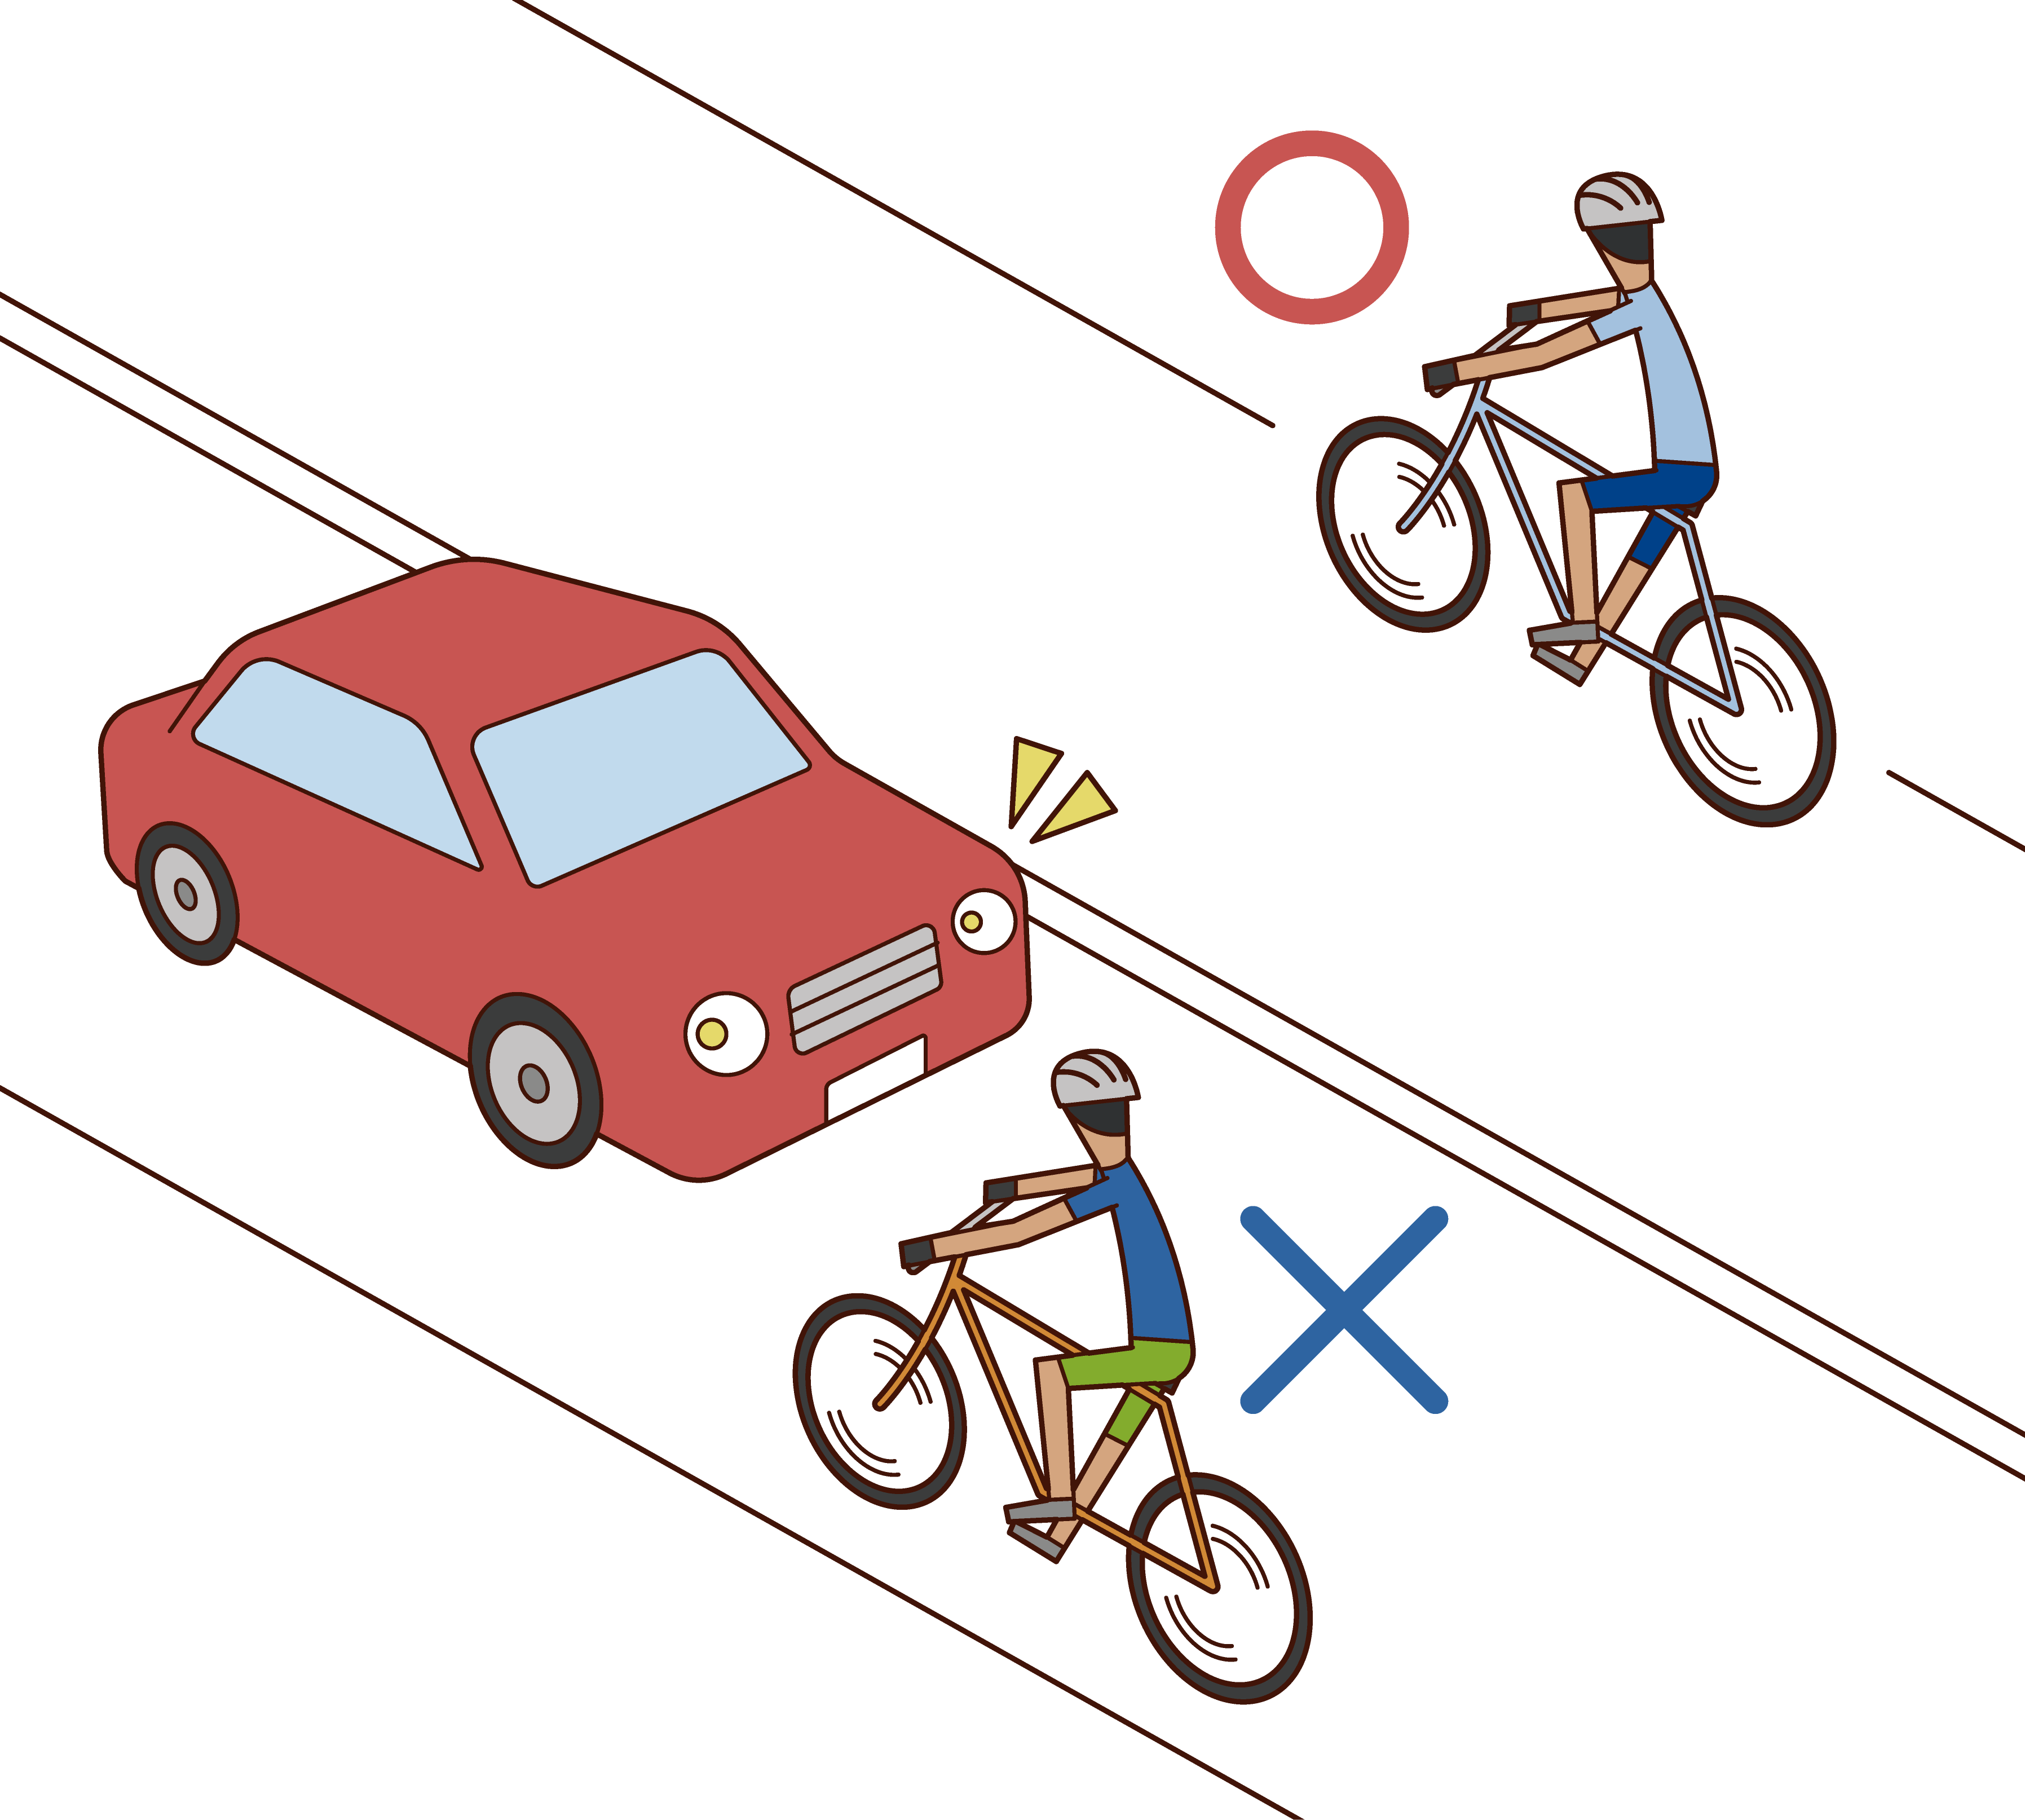 Illustration of bicycle traffic rules